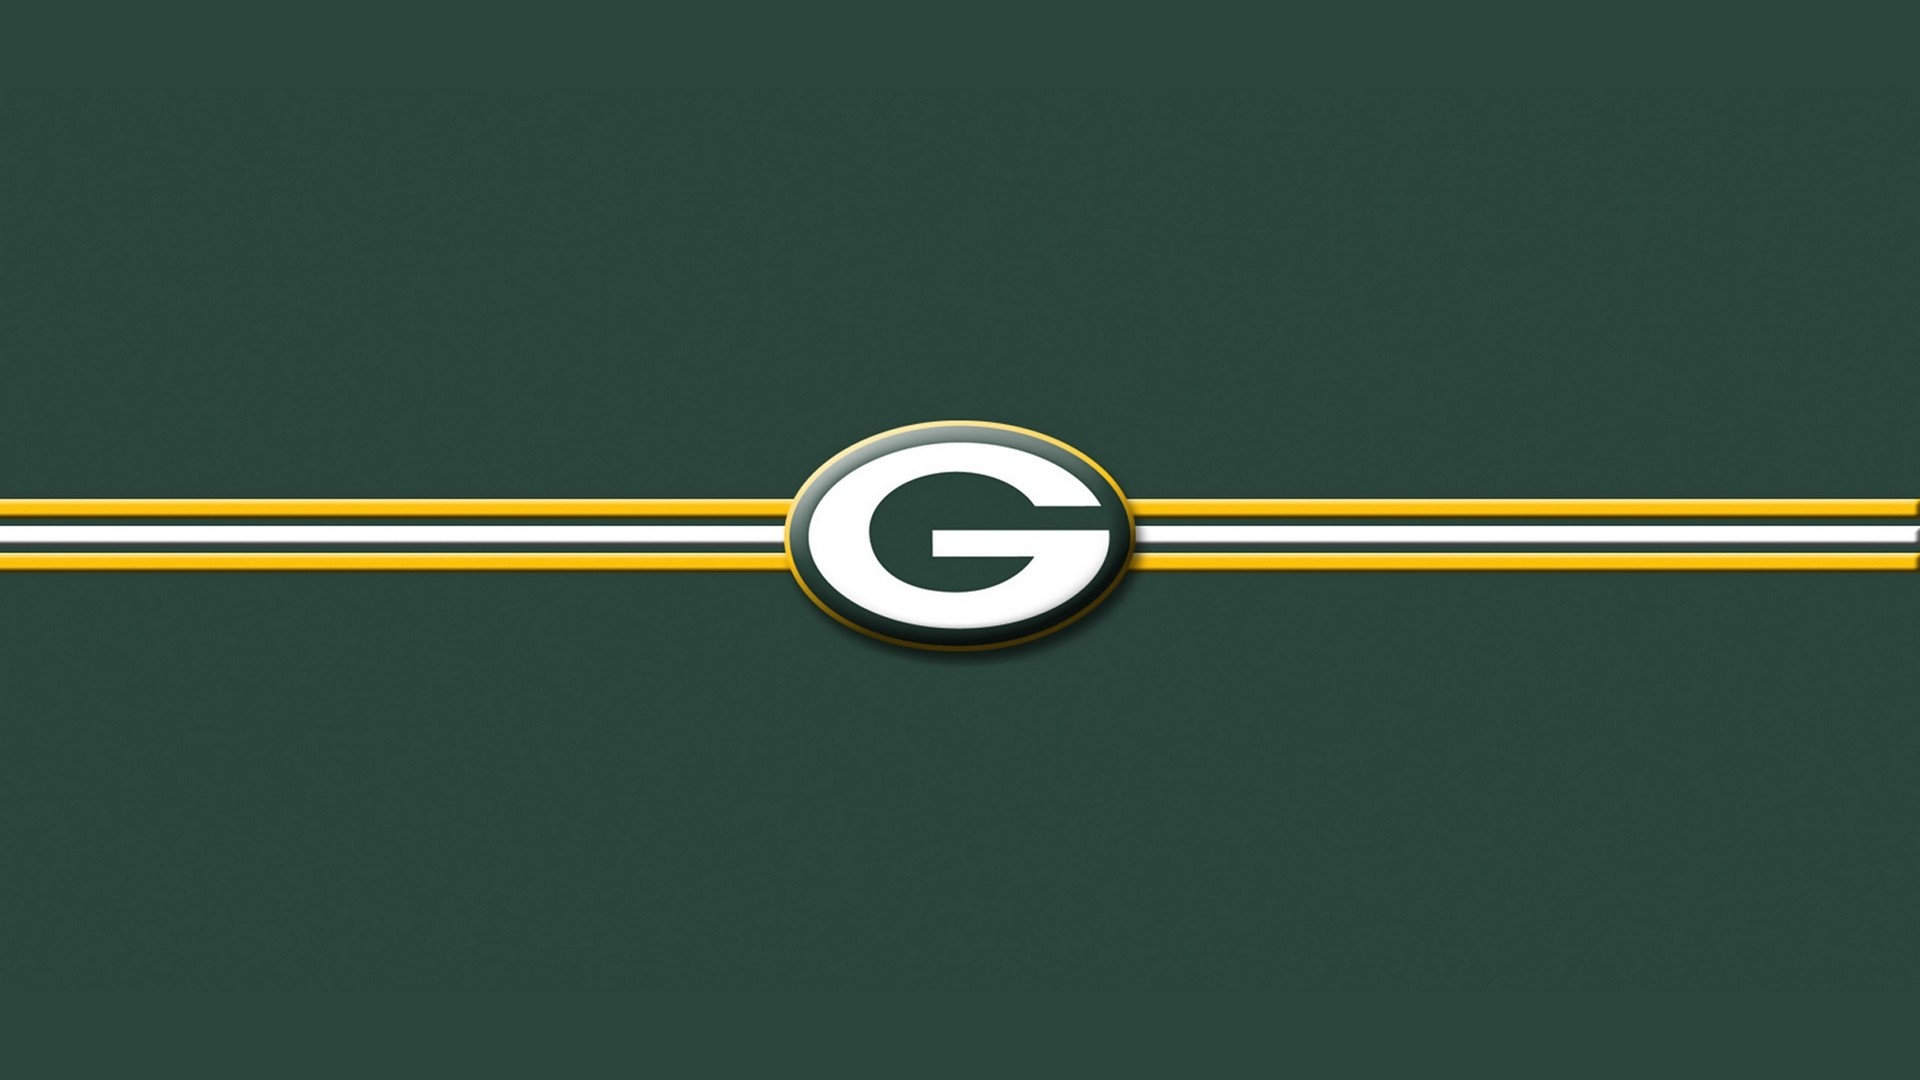 Green Bay Packers Logo Wallpaper With high-resolution 1920X1080 pixel. You can use this wallpaper for your Mac or Windows Desktop Background, iPhone, Android or Tablet and another Smartphone device